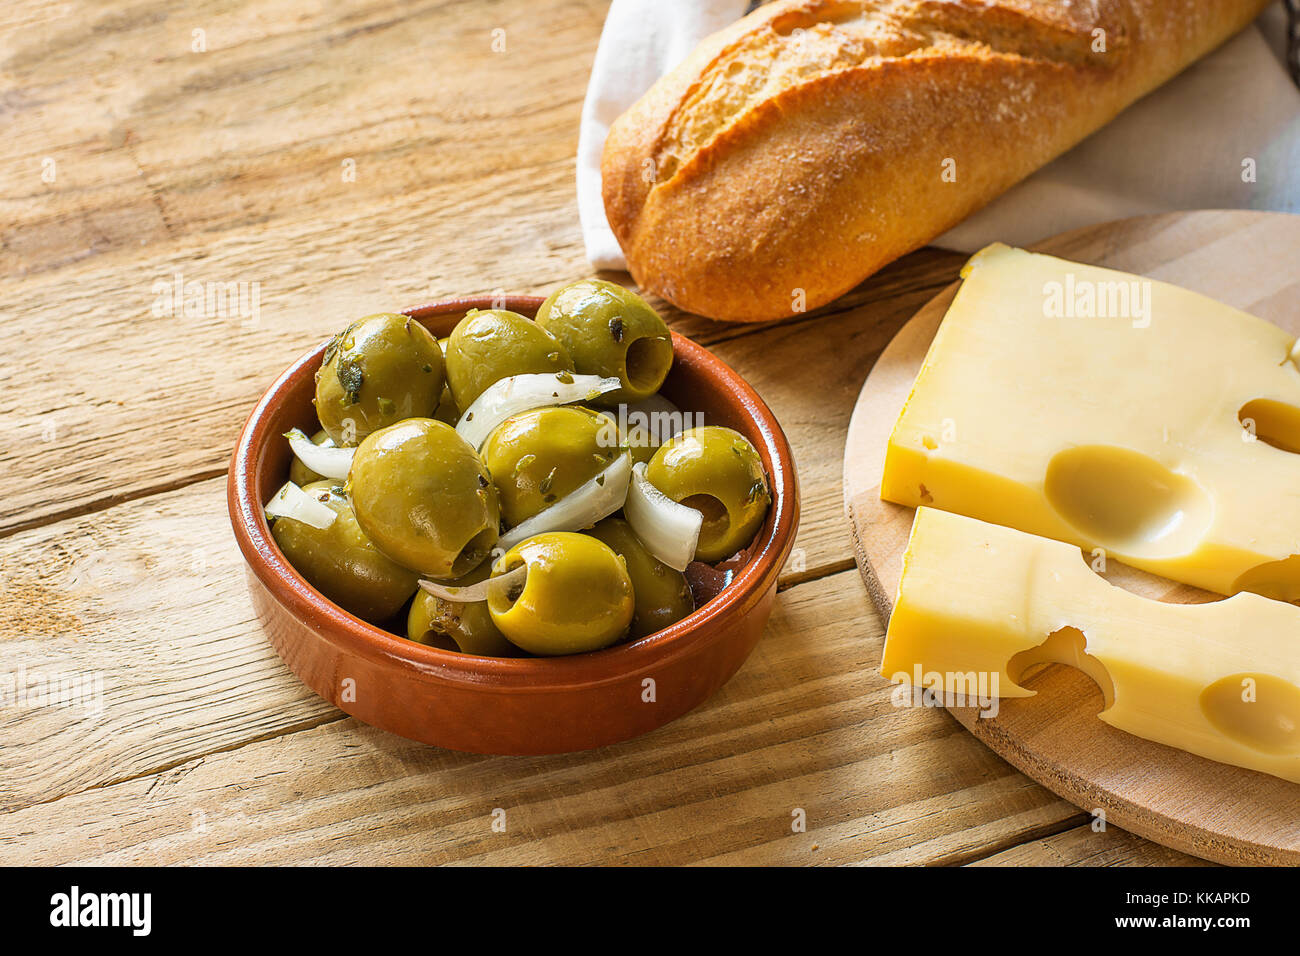 Big Spanish Green Gordal Olives with Herbs and Onions in Earthenware Bowl Baguette Maasdam Cheese on Cutting Board Wood Table Rustic Interior Mediterr Stock Photo